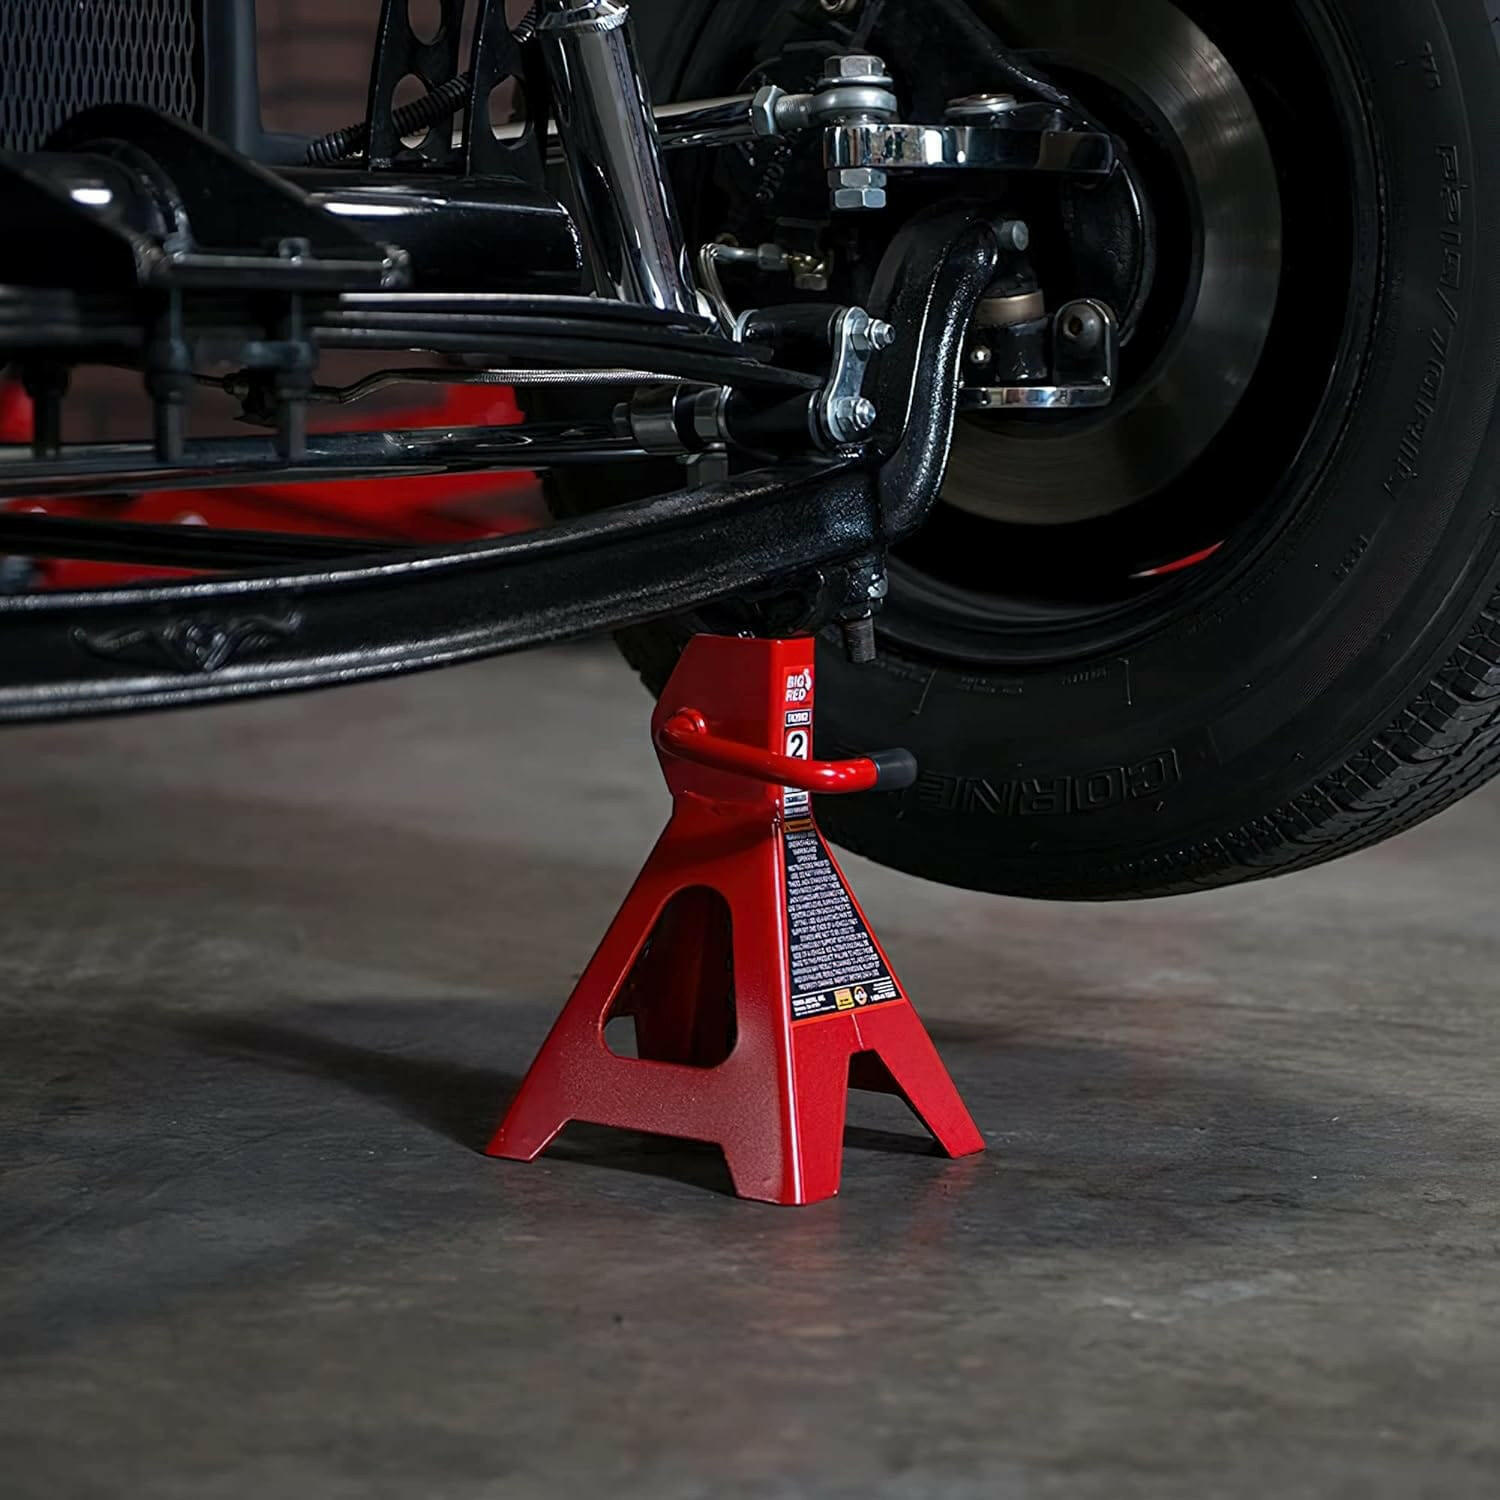 big-red-2-ton-jack-stands